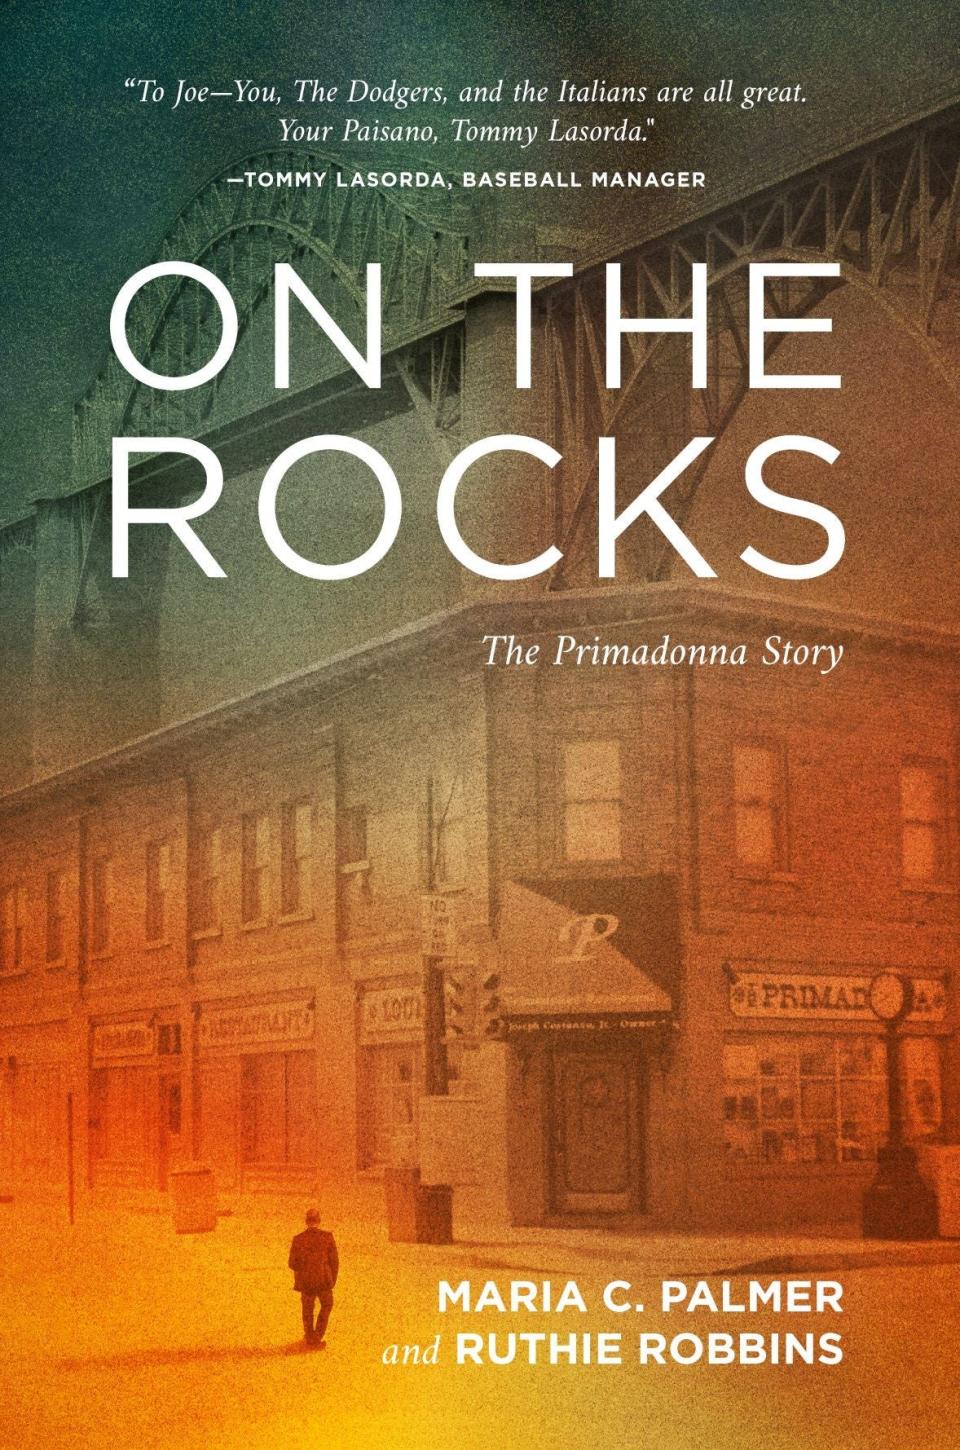 Arriving Aug. 8 is a book on the owner of McKees Rocks restaurant The Primadonna.